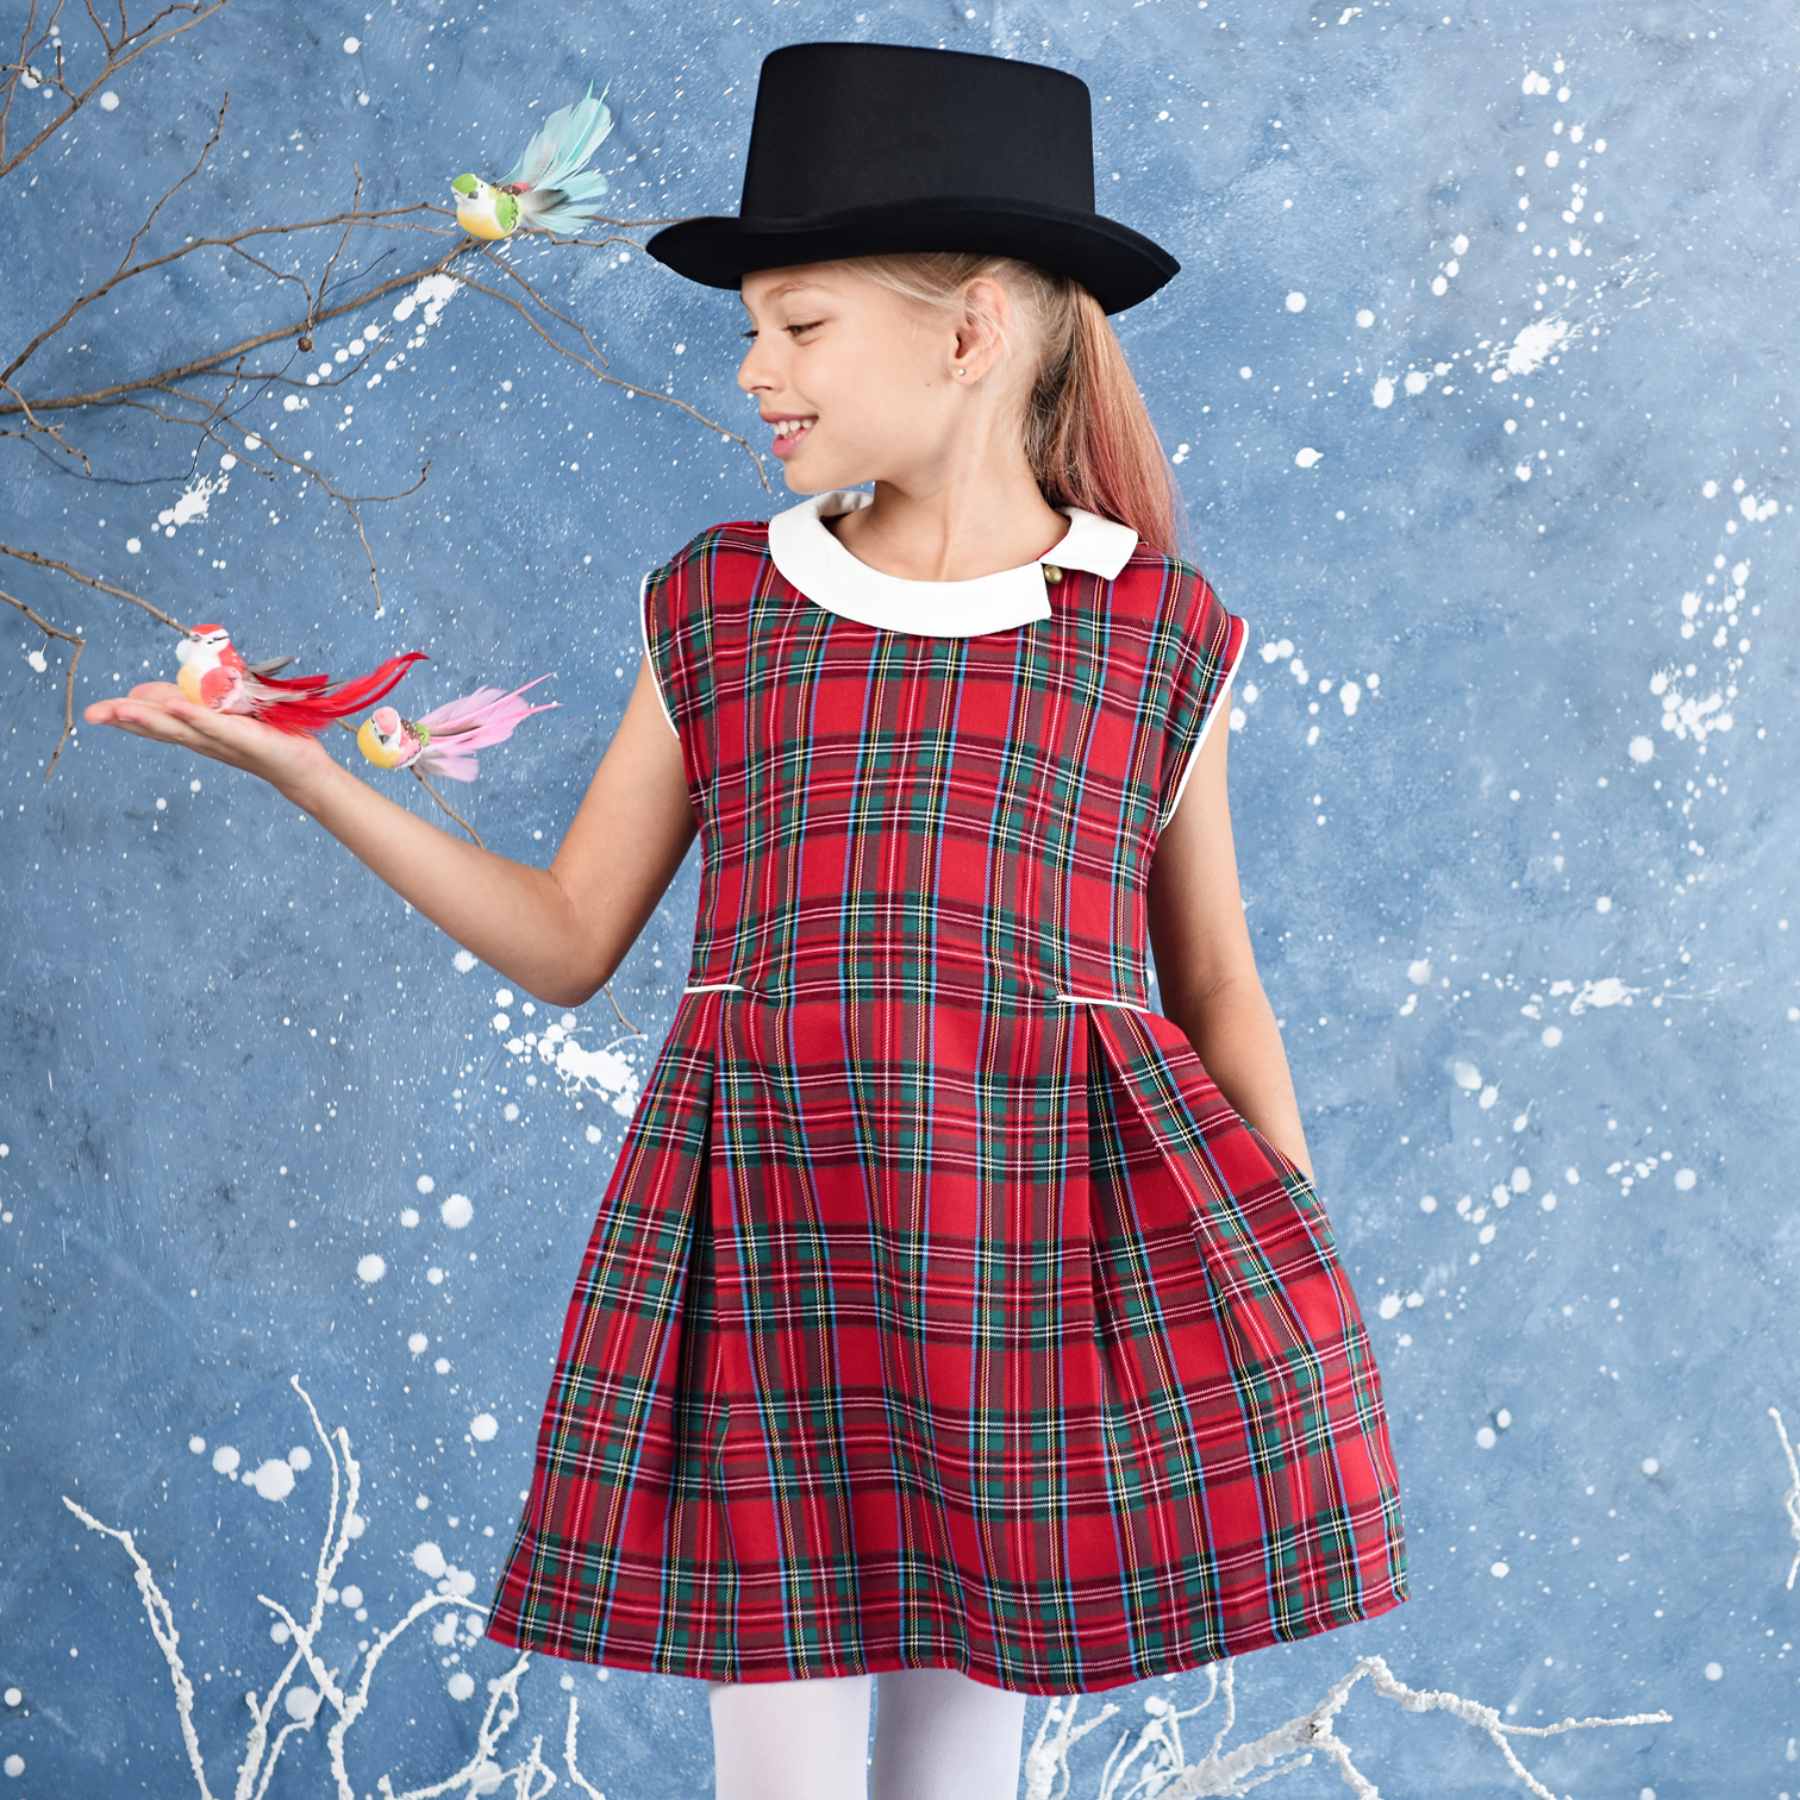 Red tartan Christmas dress for girls from the children's fashion brand LA FAUTE A VOLTAIRE